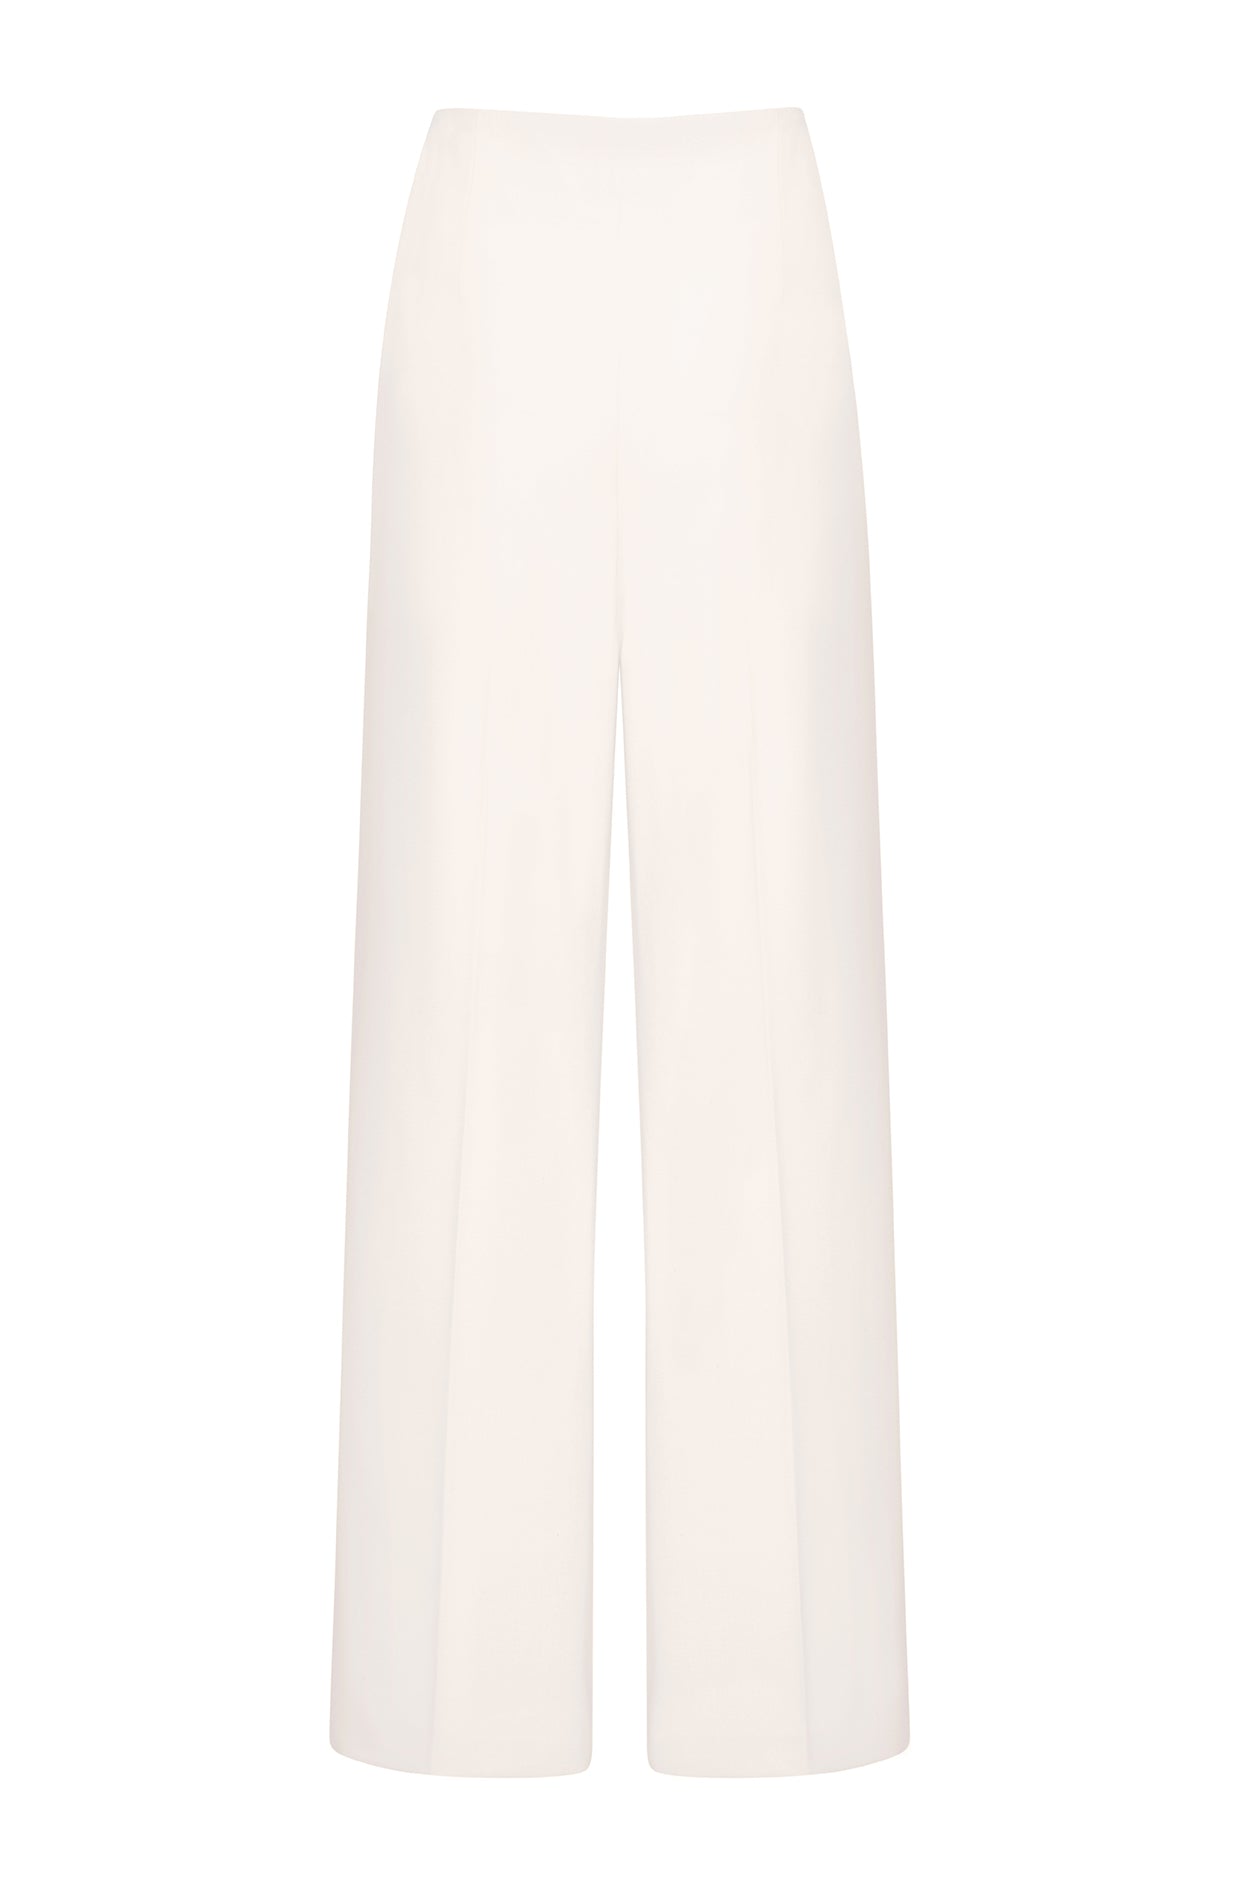 Wide Leg Trousers in Plain Ivory Crepe - Paloma